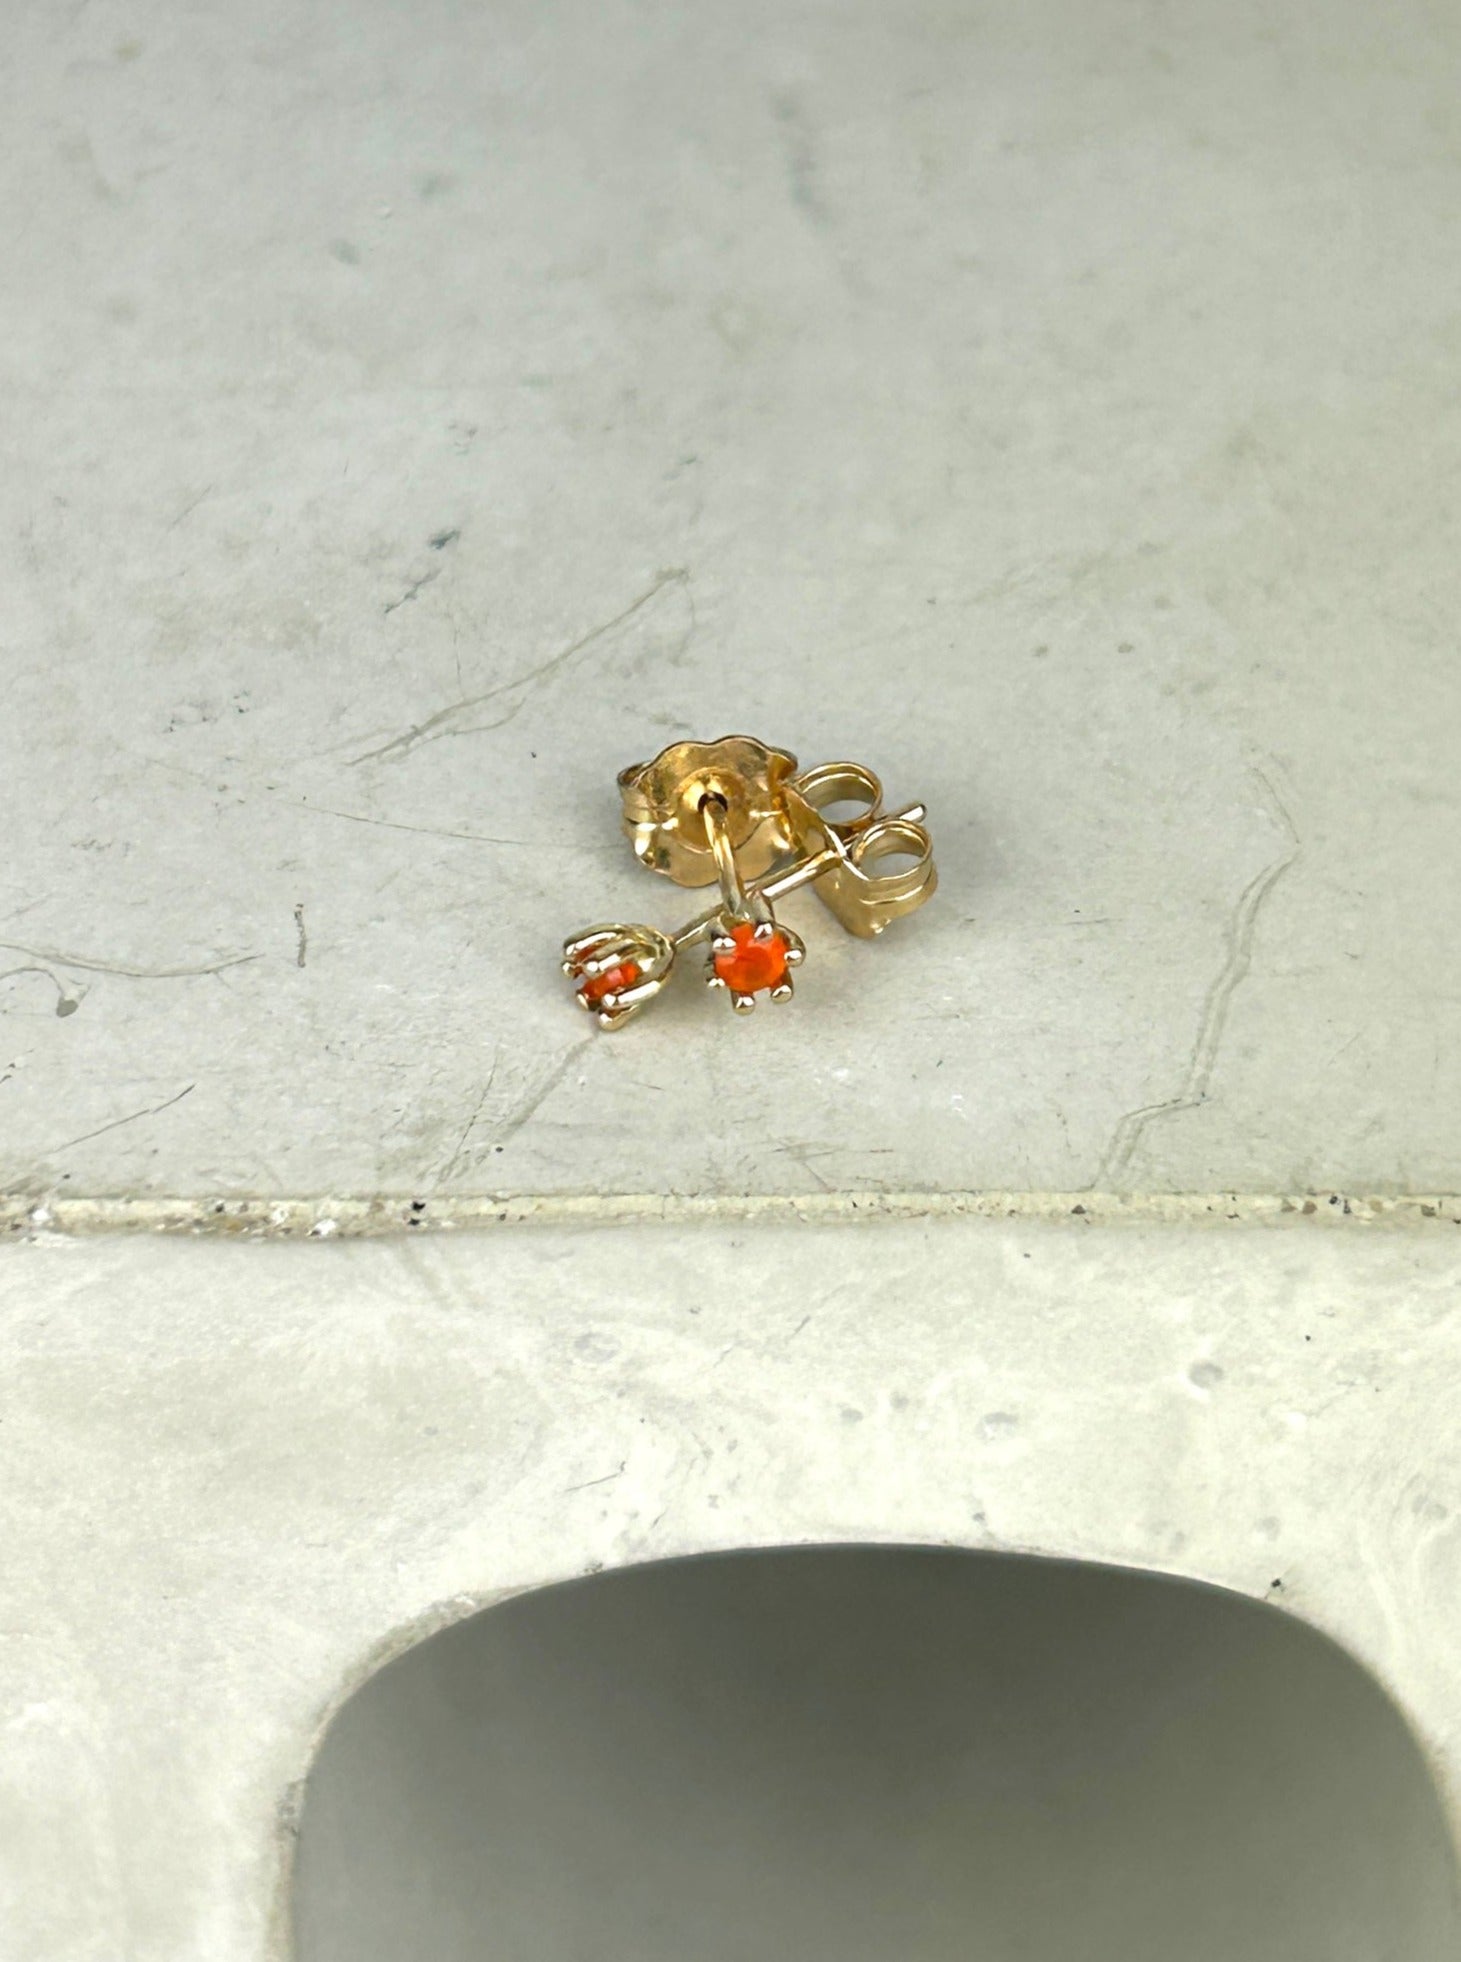 Top view of 14k gold earrings with bright orange carnelians that resemble tulips are laid in a criss crossing pattern on a grey surface